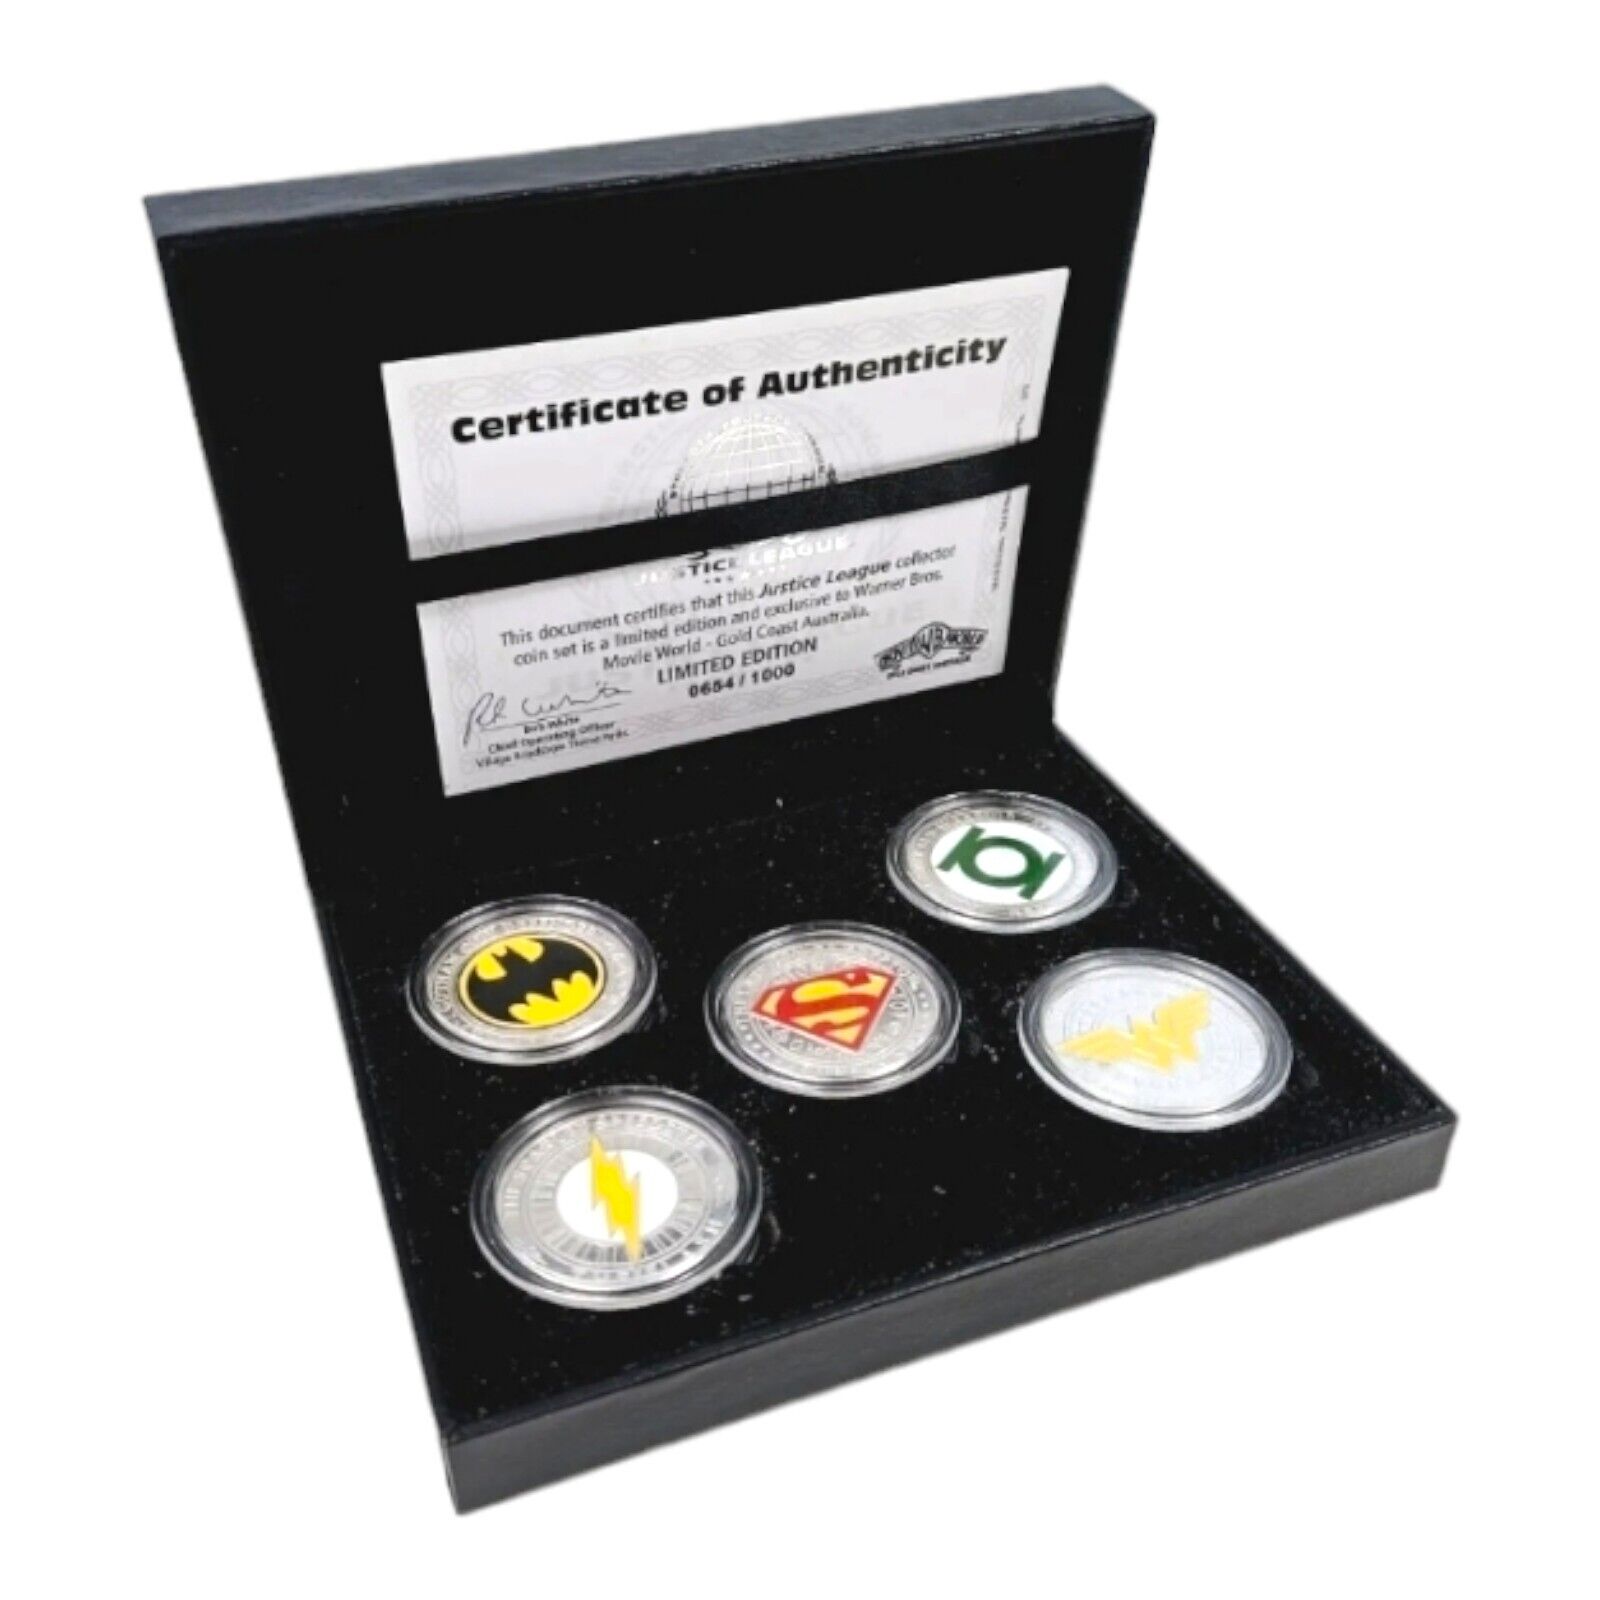 WB Movie World Justice League Collector Coins Set Limited Edition 0654 / 1000